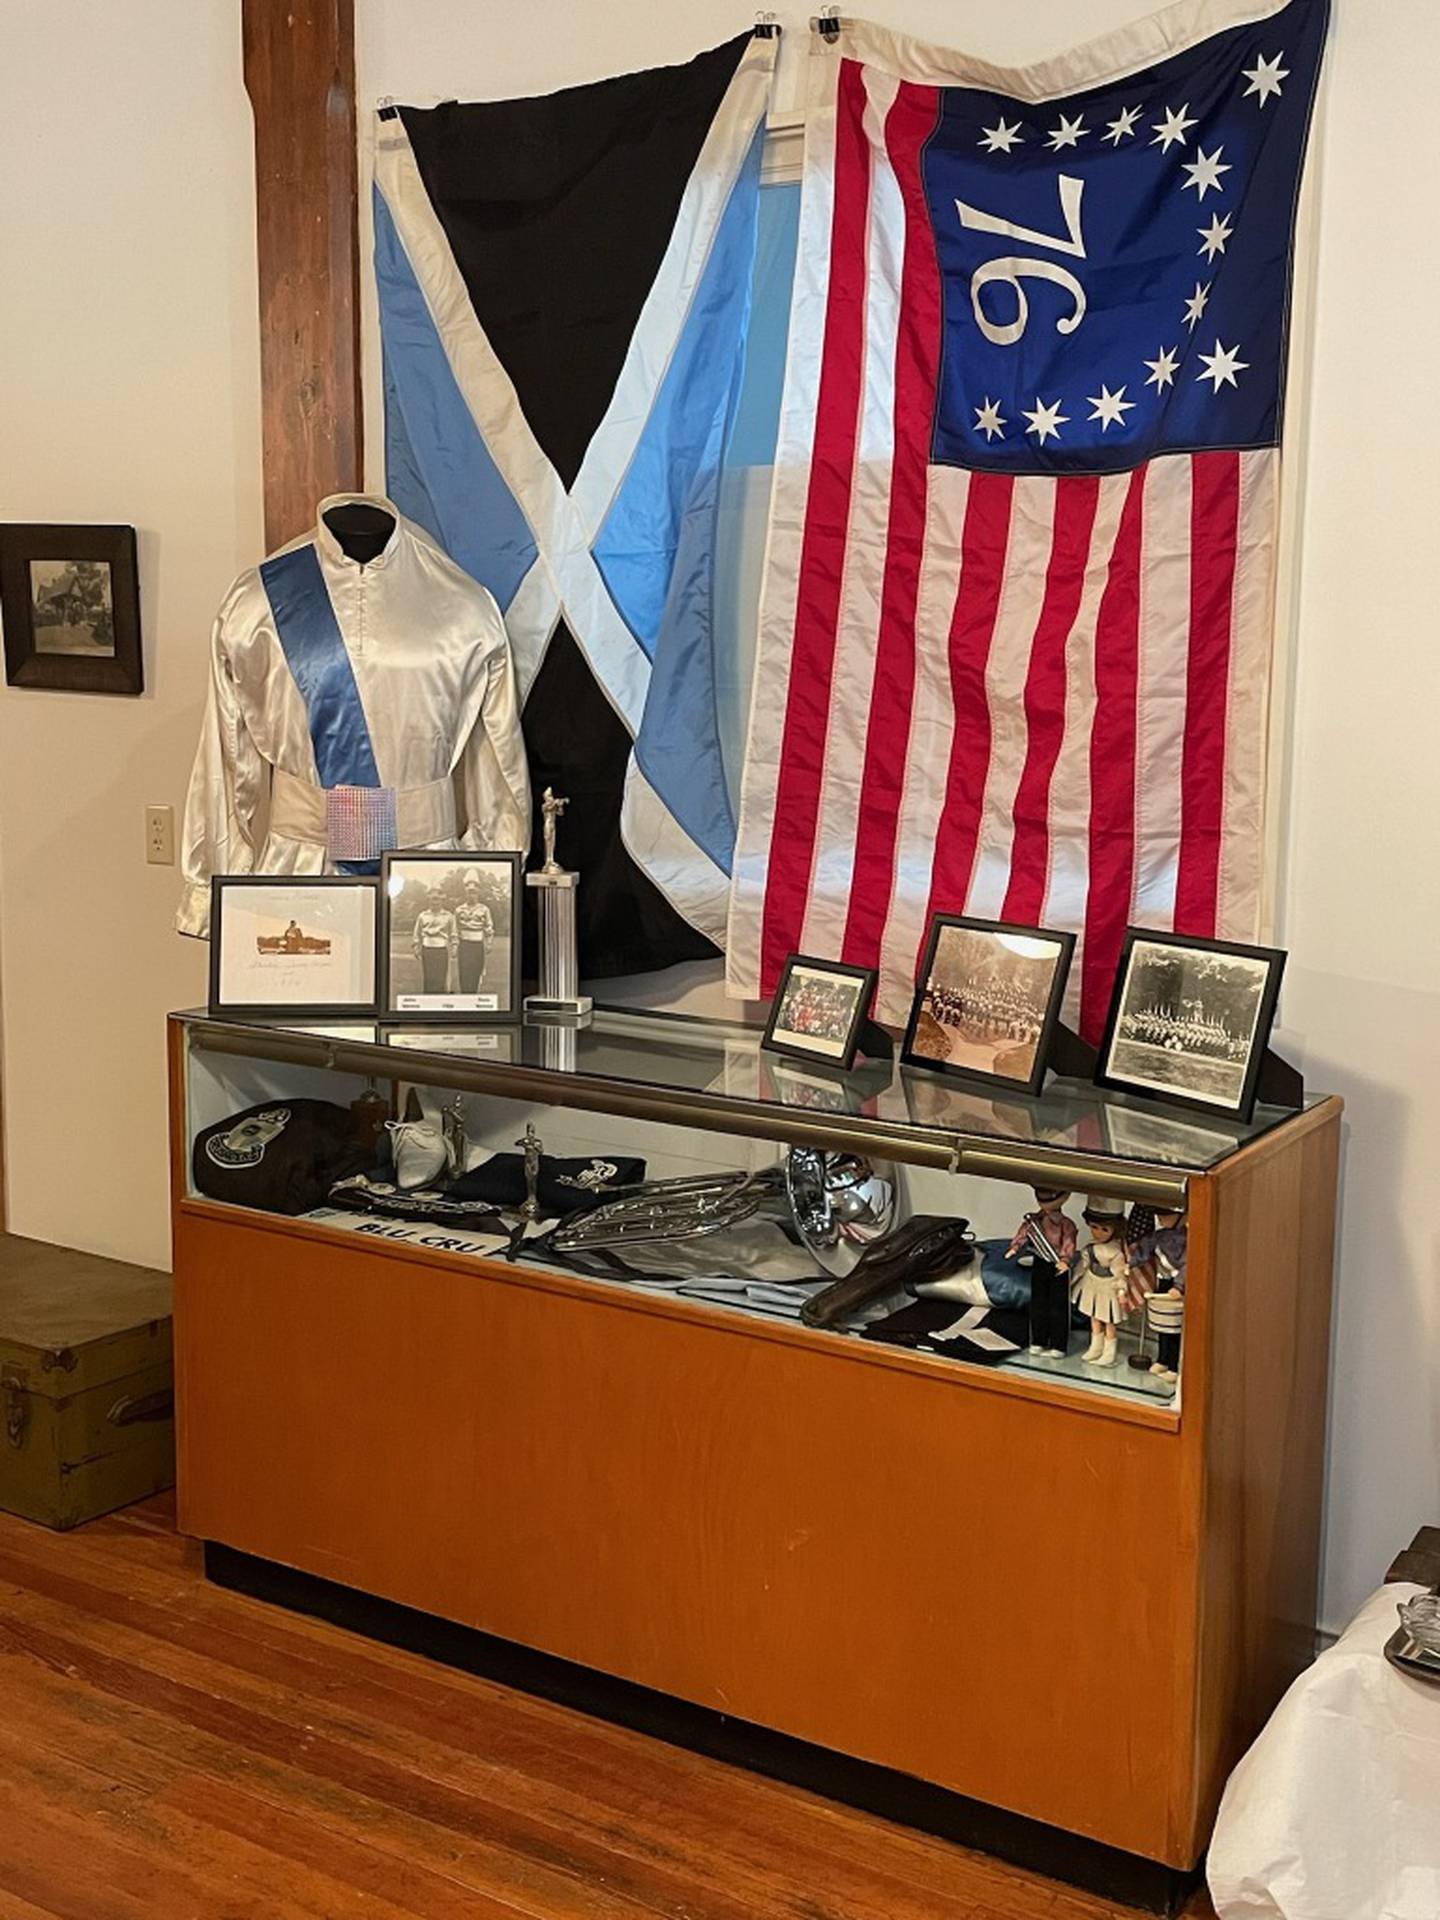 The new display at the La Salle County Historical Museum on the Crusader drum corps.